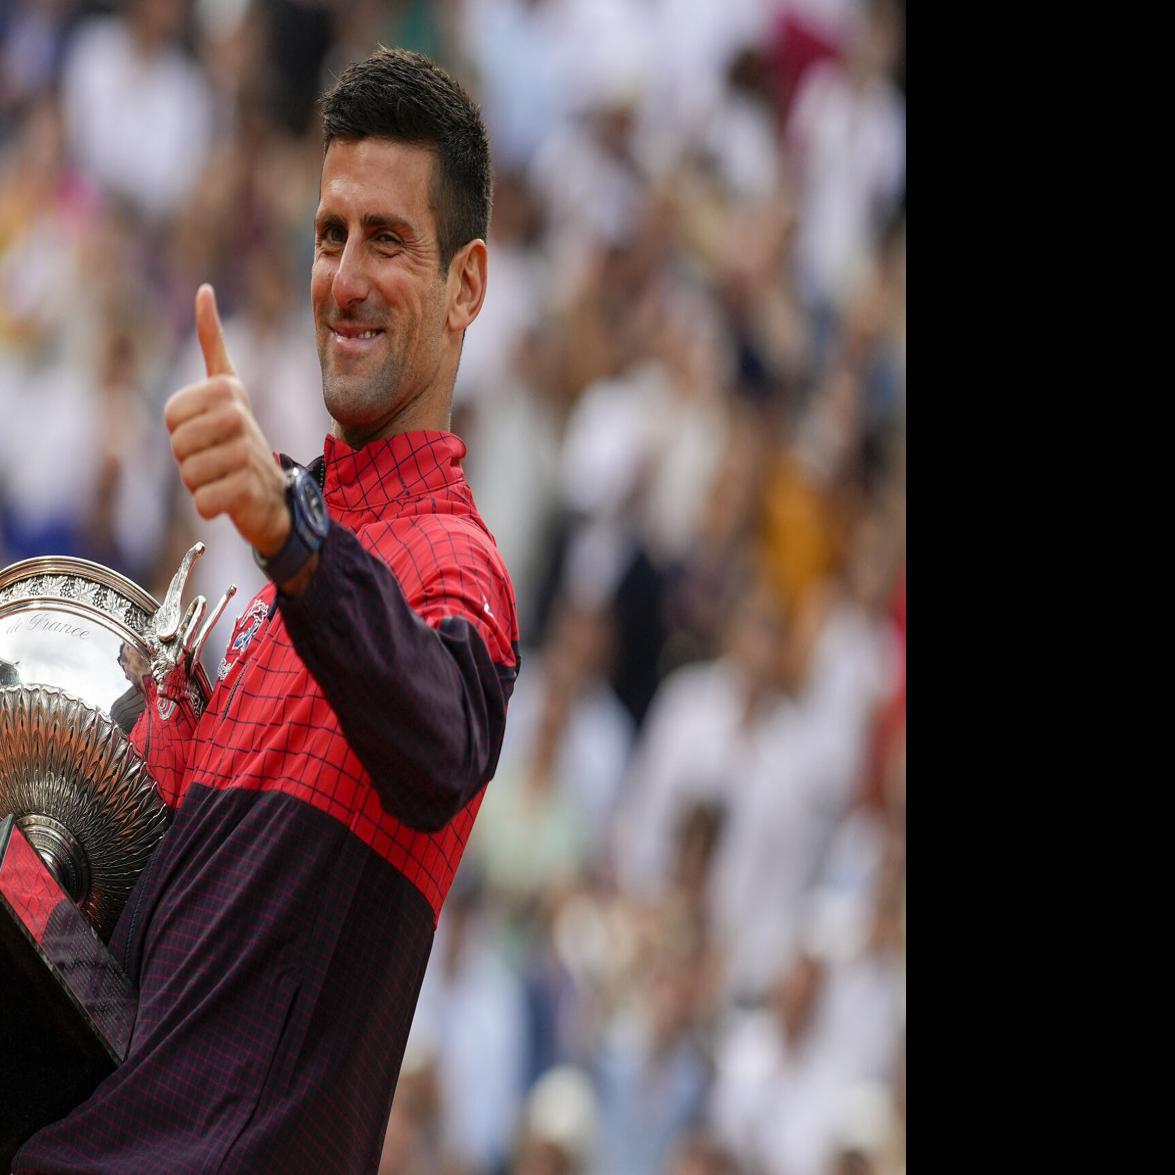 Novak Djokovic gets French Open campaign off to winning start; matches  Roger Federer record